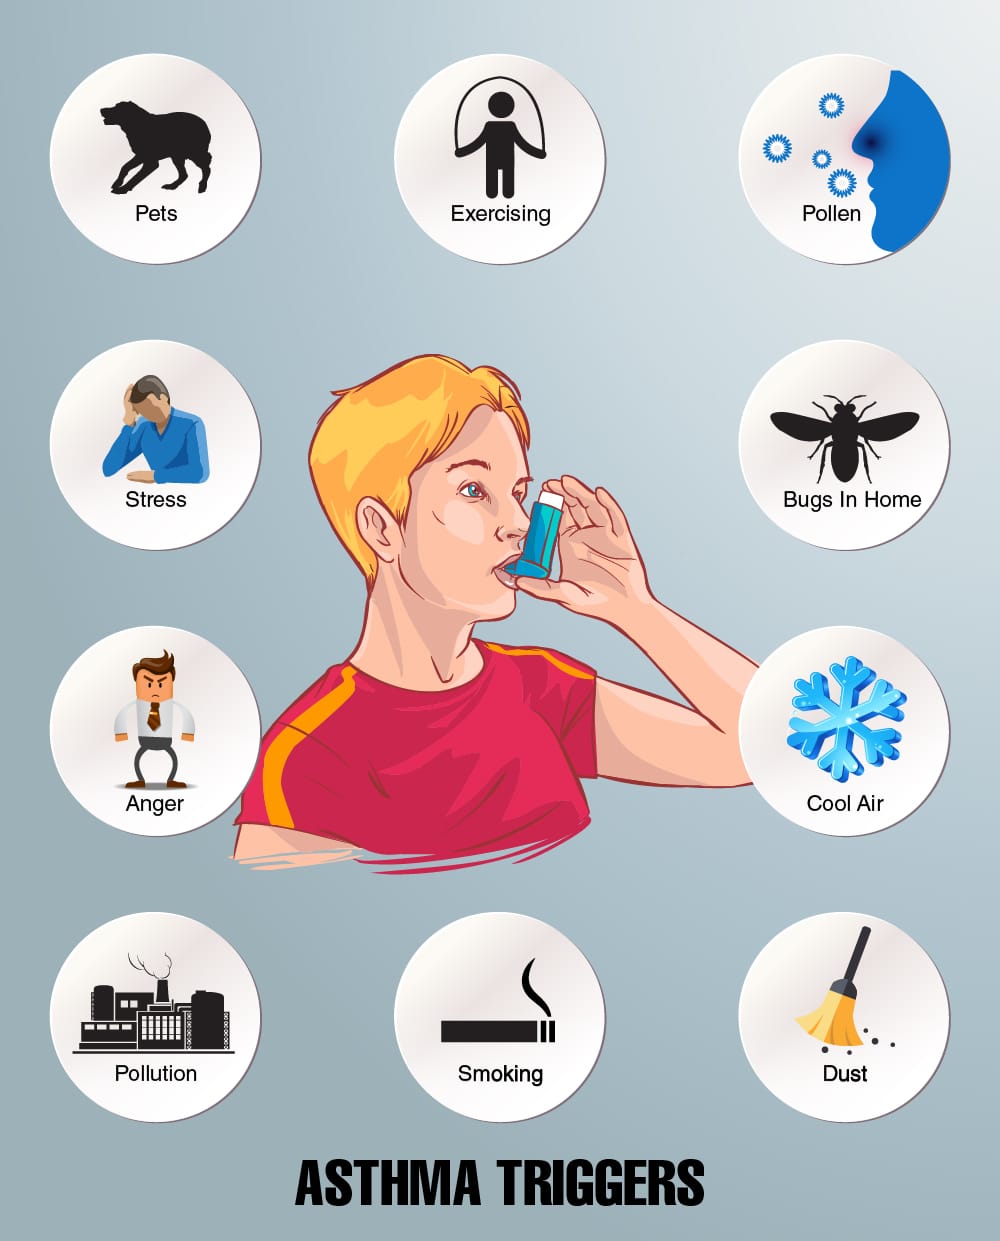 Asthma Attack: Causes, Symptoms, Treatment. Trigger factors of Asthma